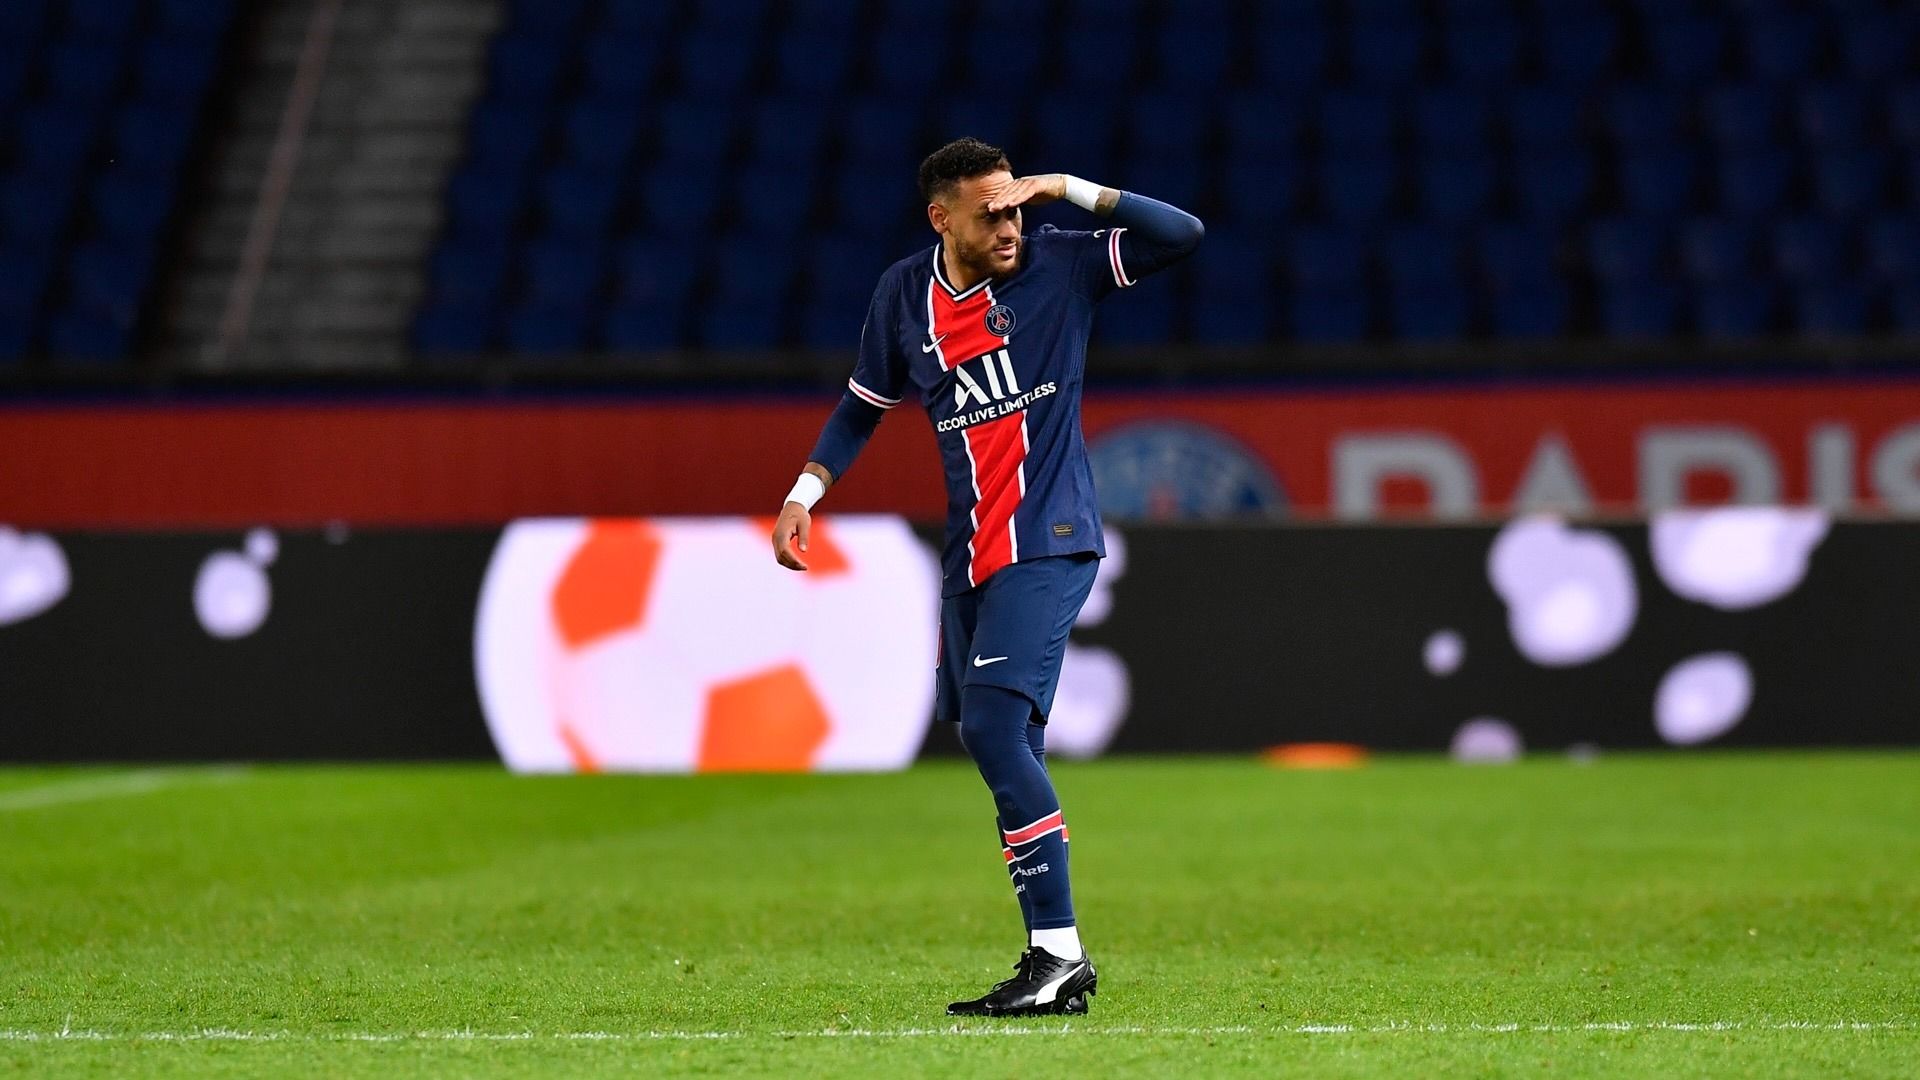 Missed him? With two goals from Neymar Jr, PSG defeats Angers. Neymar Jr